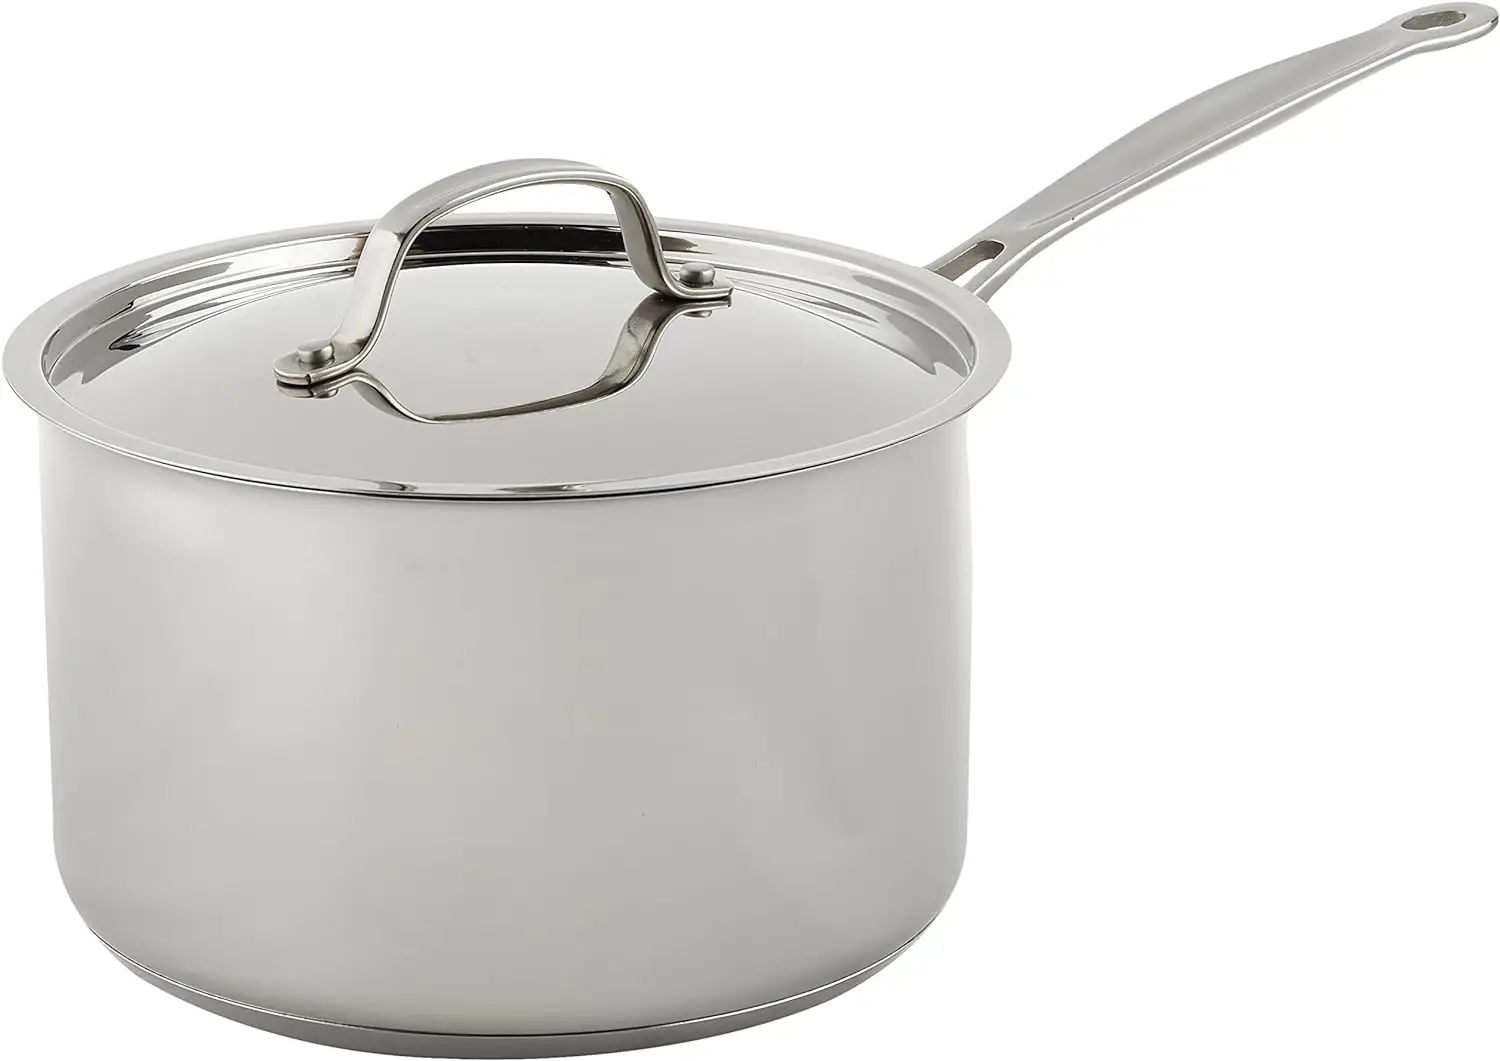 

Chef's Classic Stainless 4-Quart Saucepan with Cover Big pot for cooking Stainless pot Cookware Cooking glass pot 냄비 Egg pan